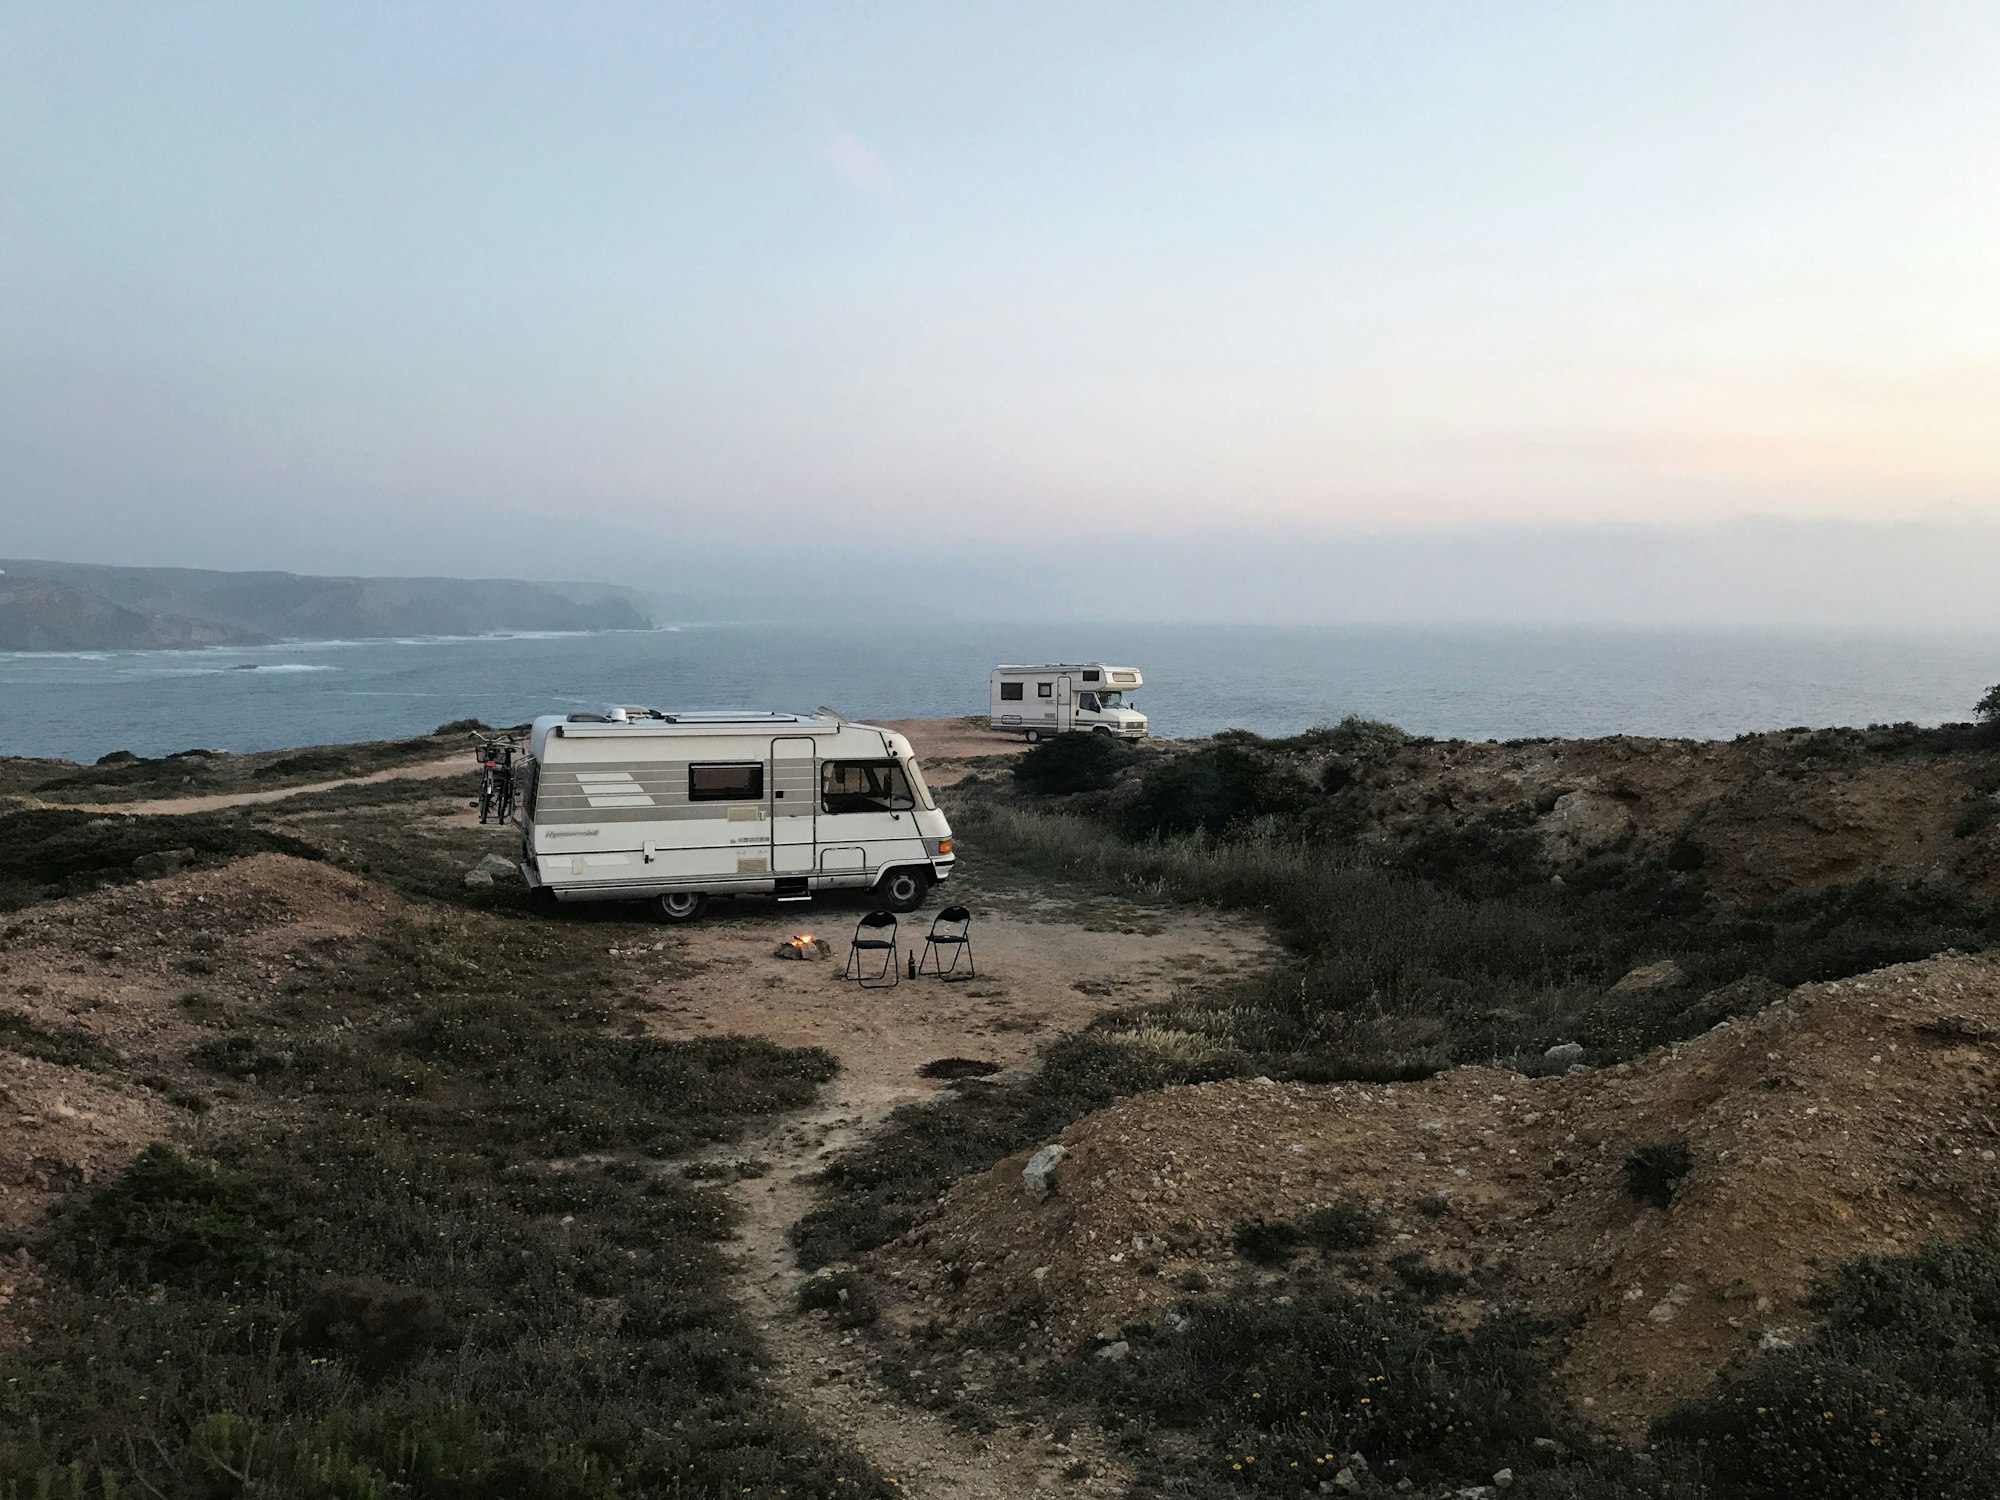 vanlife situation in portugal, campervans parking by the coast, having a camp fire and enjoying the sunset (amado beach, portugal)